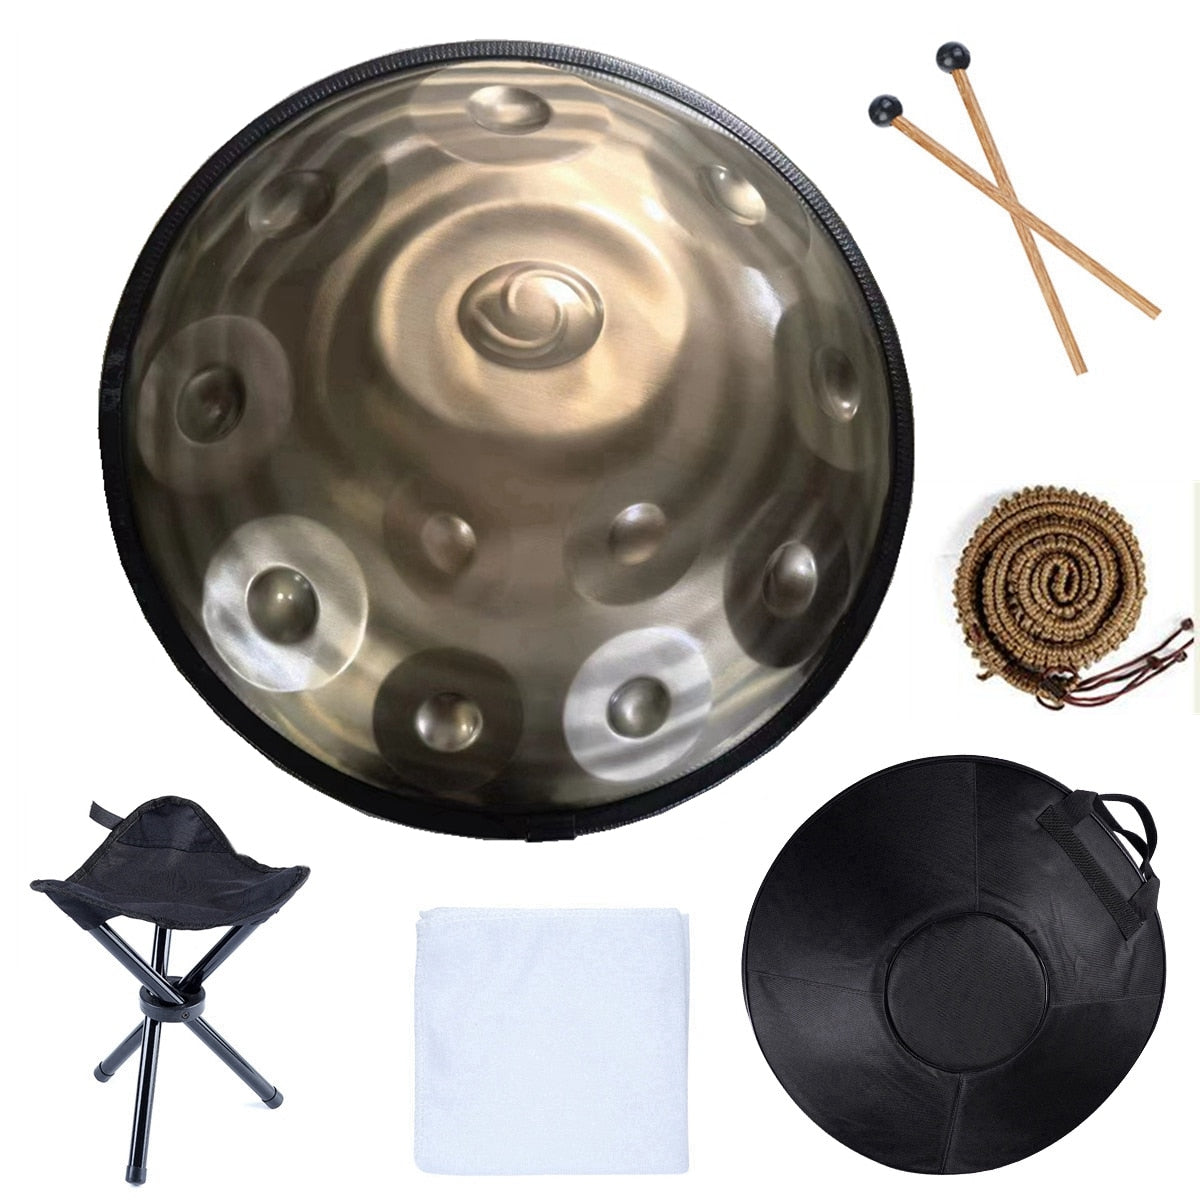 440Hz D Minor 9/10/12 Notes Spiral Hand Pan Stainless Steel Tongue Hand Drum Sound Yoga Meditation Percussion Instrument - w Carry Bag & Accessories - DITCHWORLD